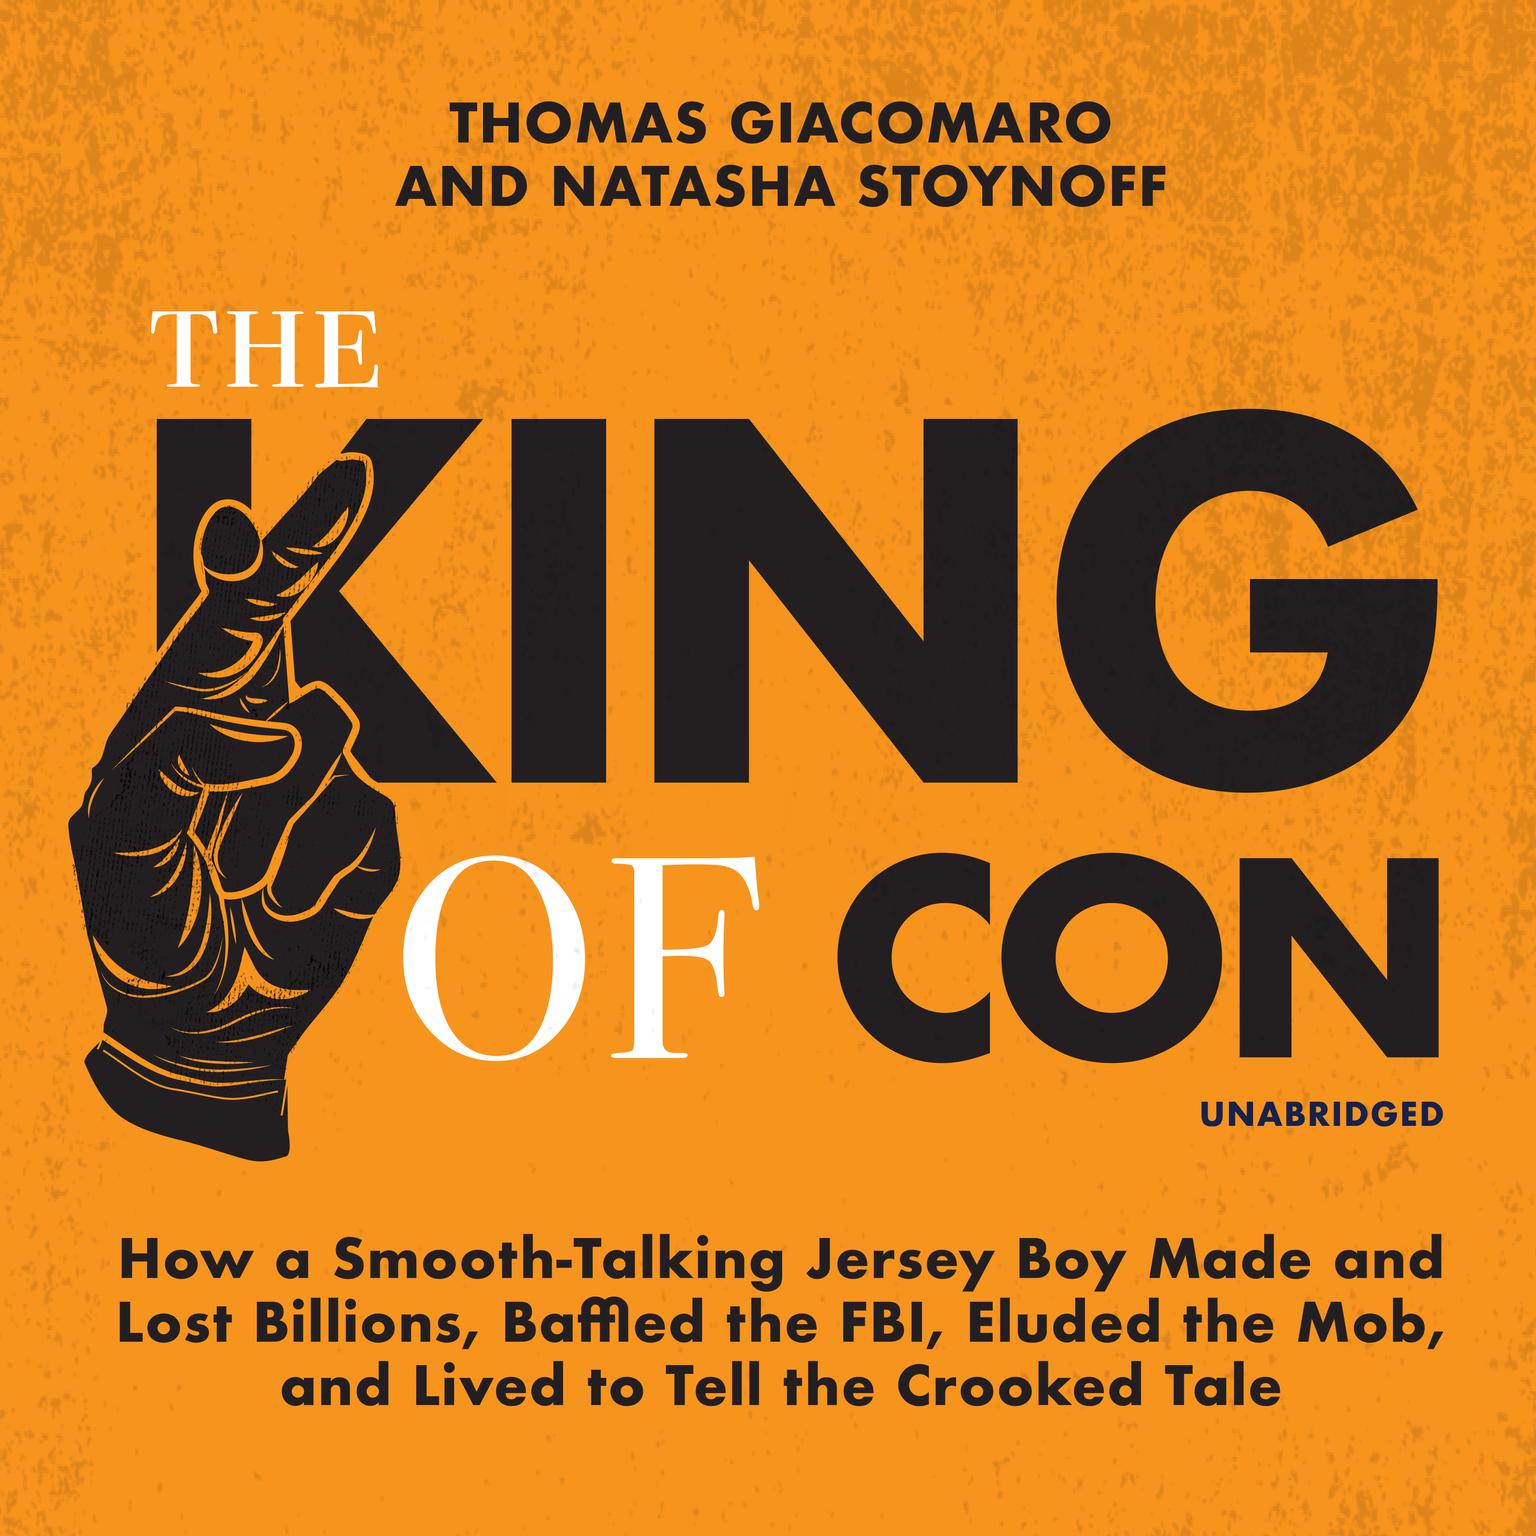 The King of Con: How a Smooth-Talking Jersey Boy Made and Lost Billions, Baffled the FBI, Eluded the Mob, and Lived to Tell the Crooked Tale Audiobook, by Thomas Giacomaro